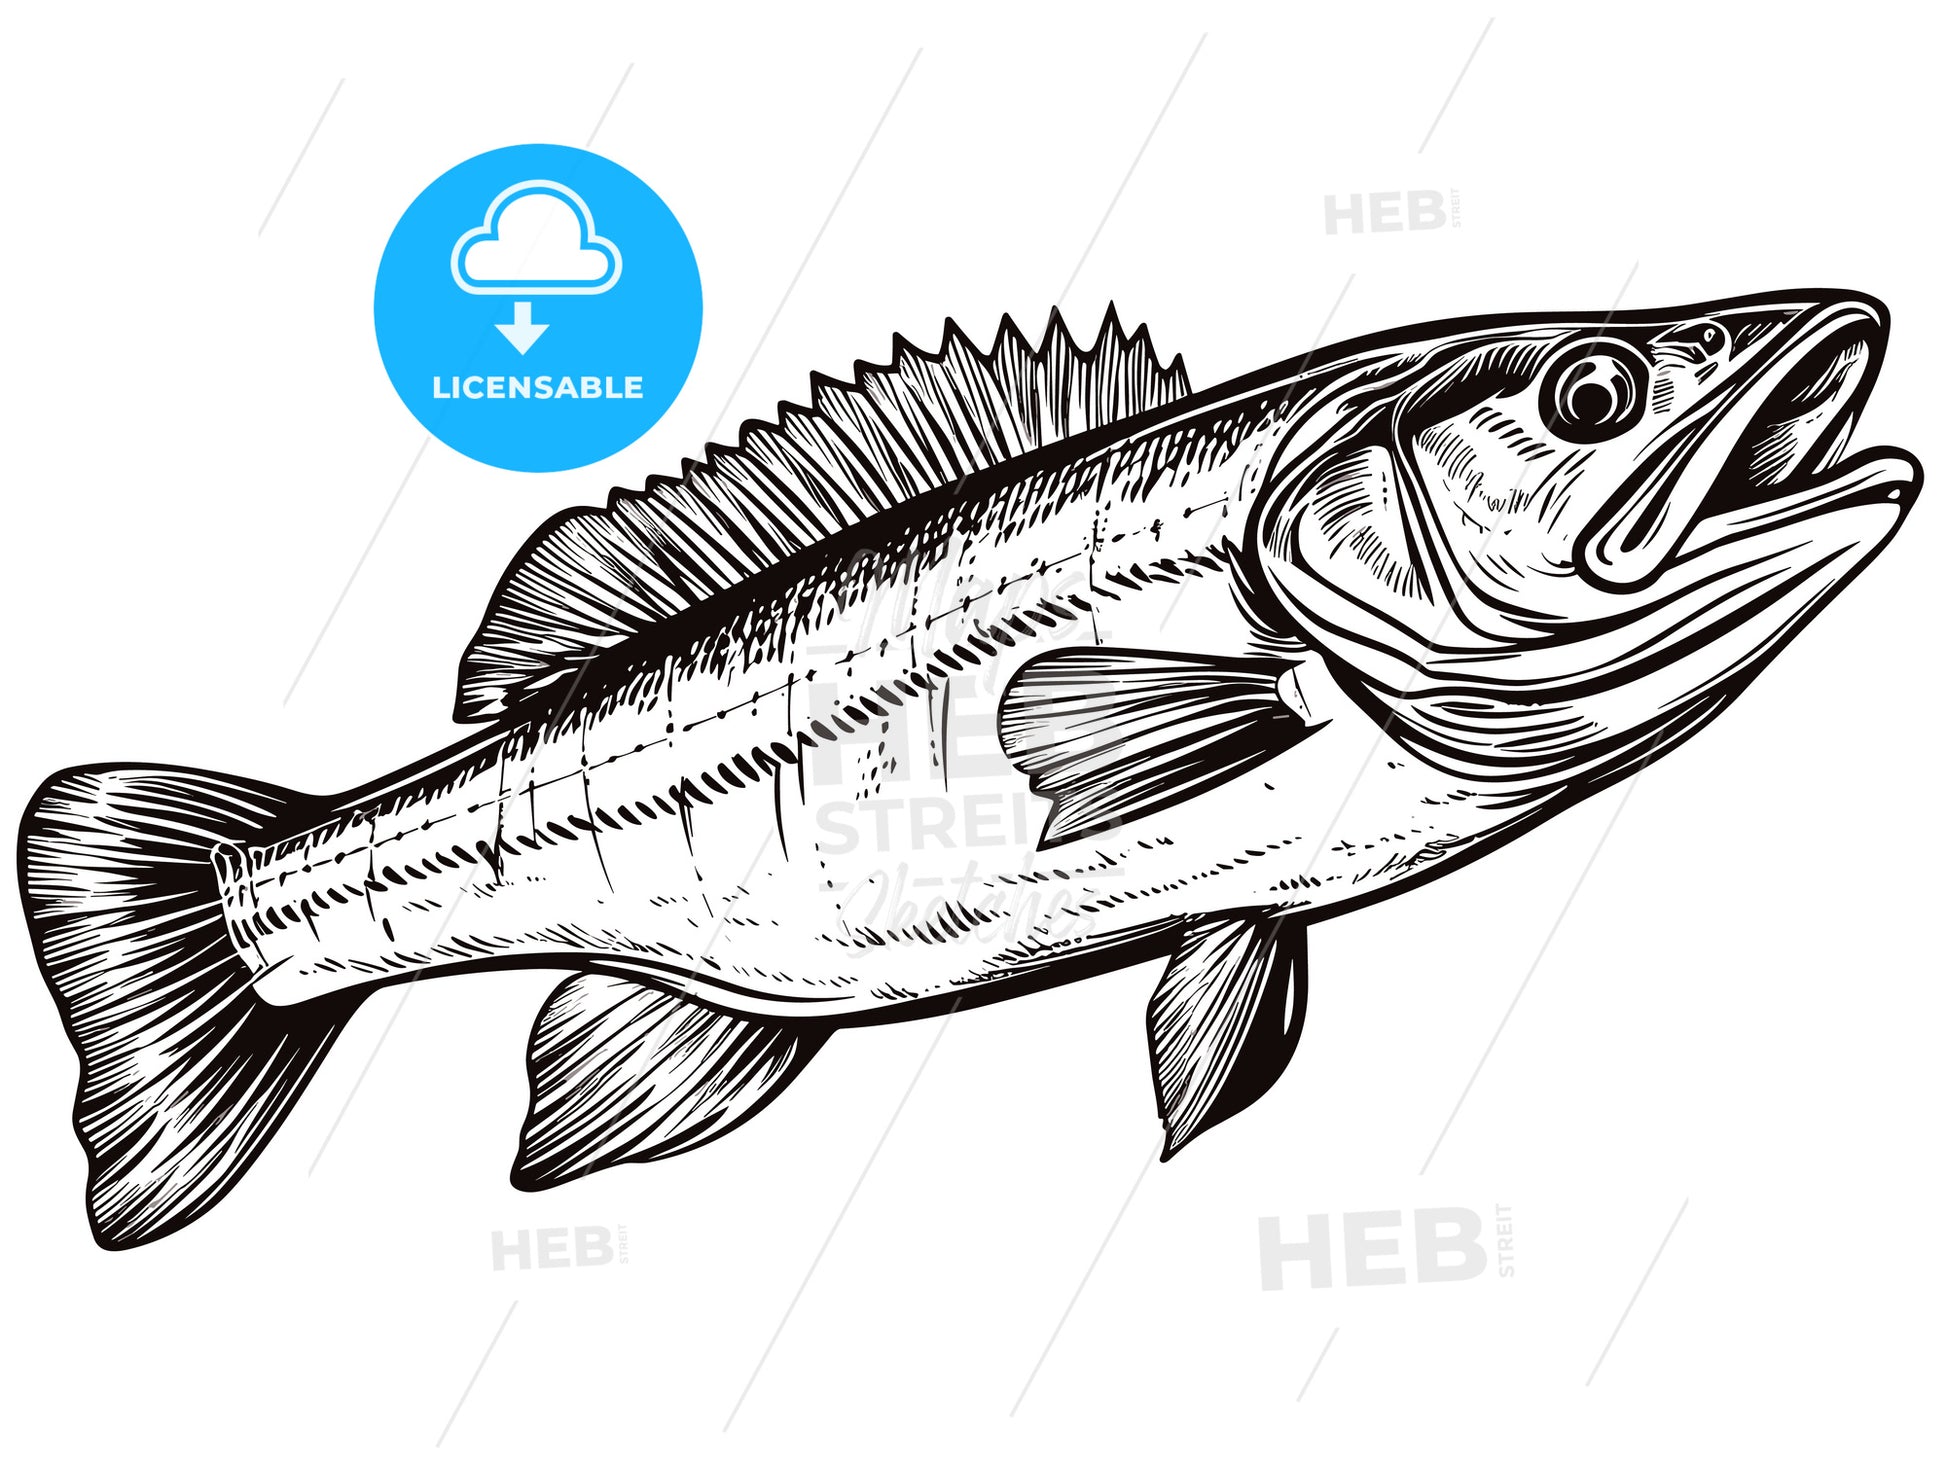 Walleye fish sign on white background. - HEBSTREITS Stock Image